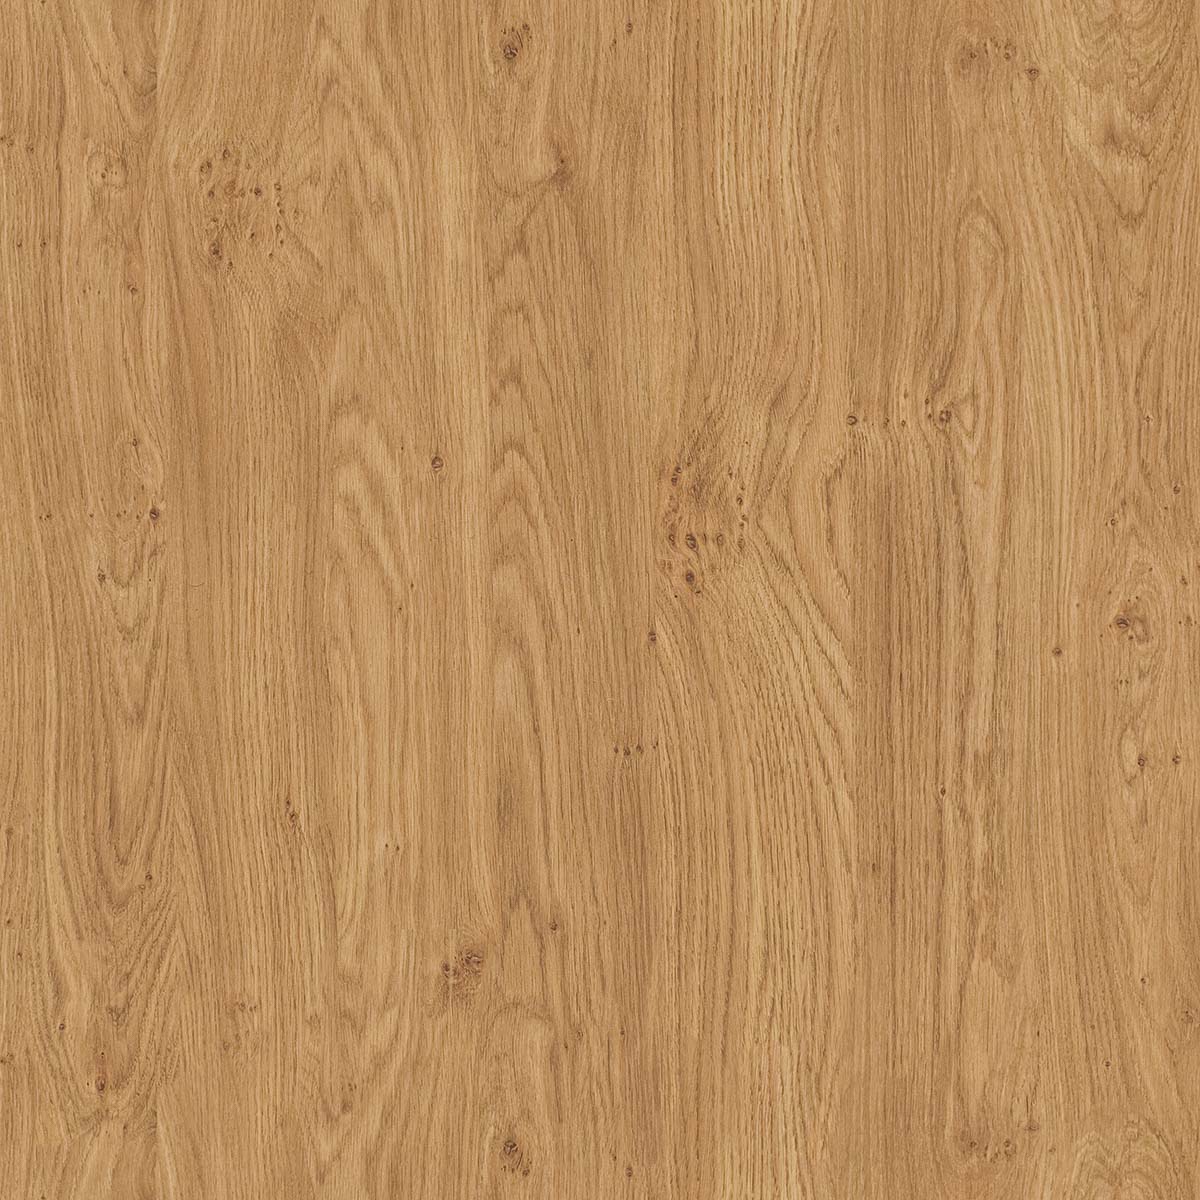 A close up of a wood surface